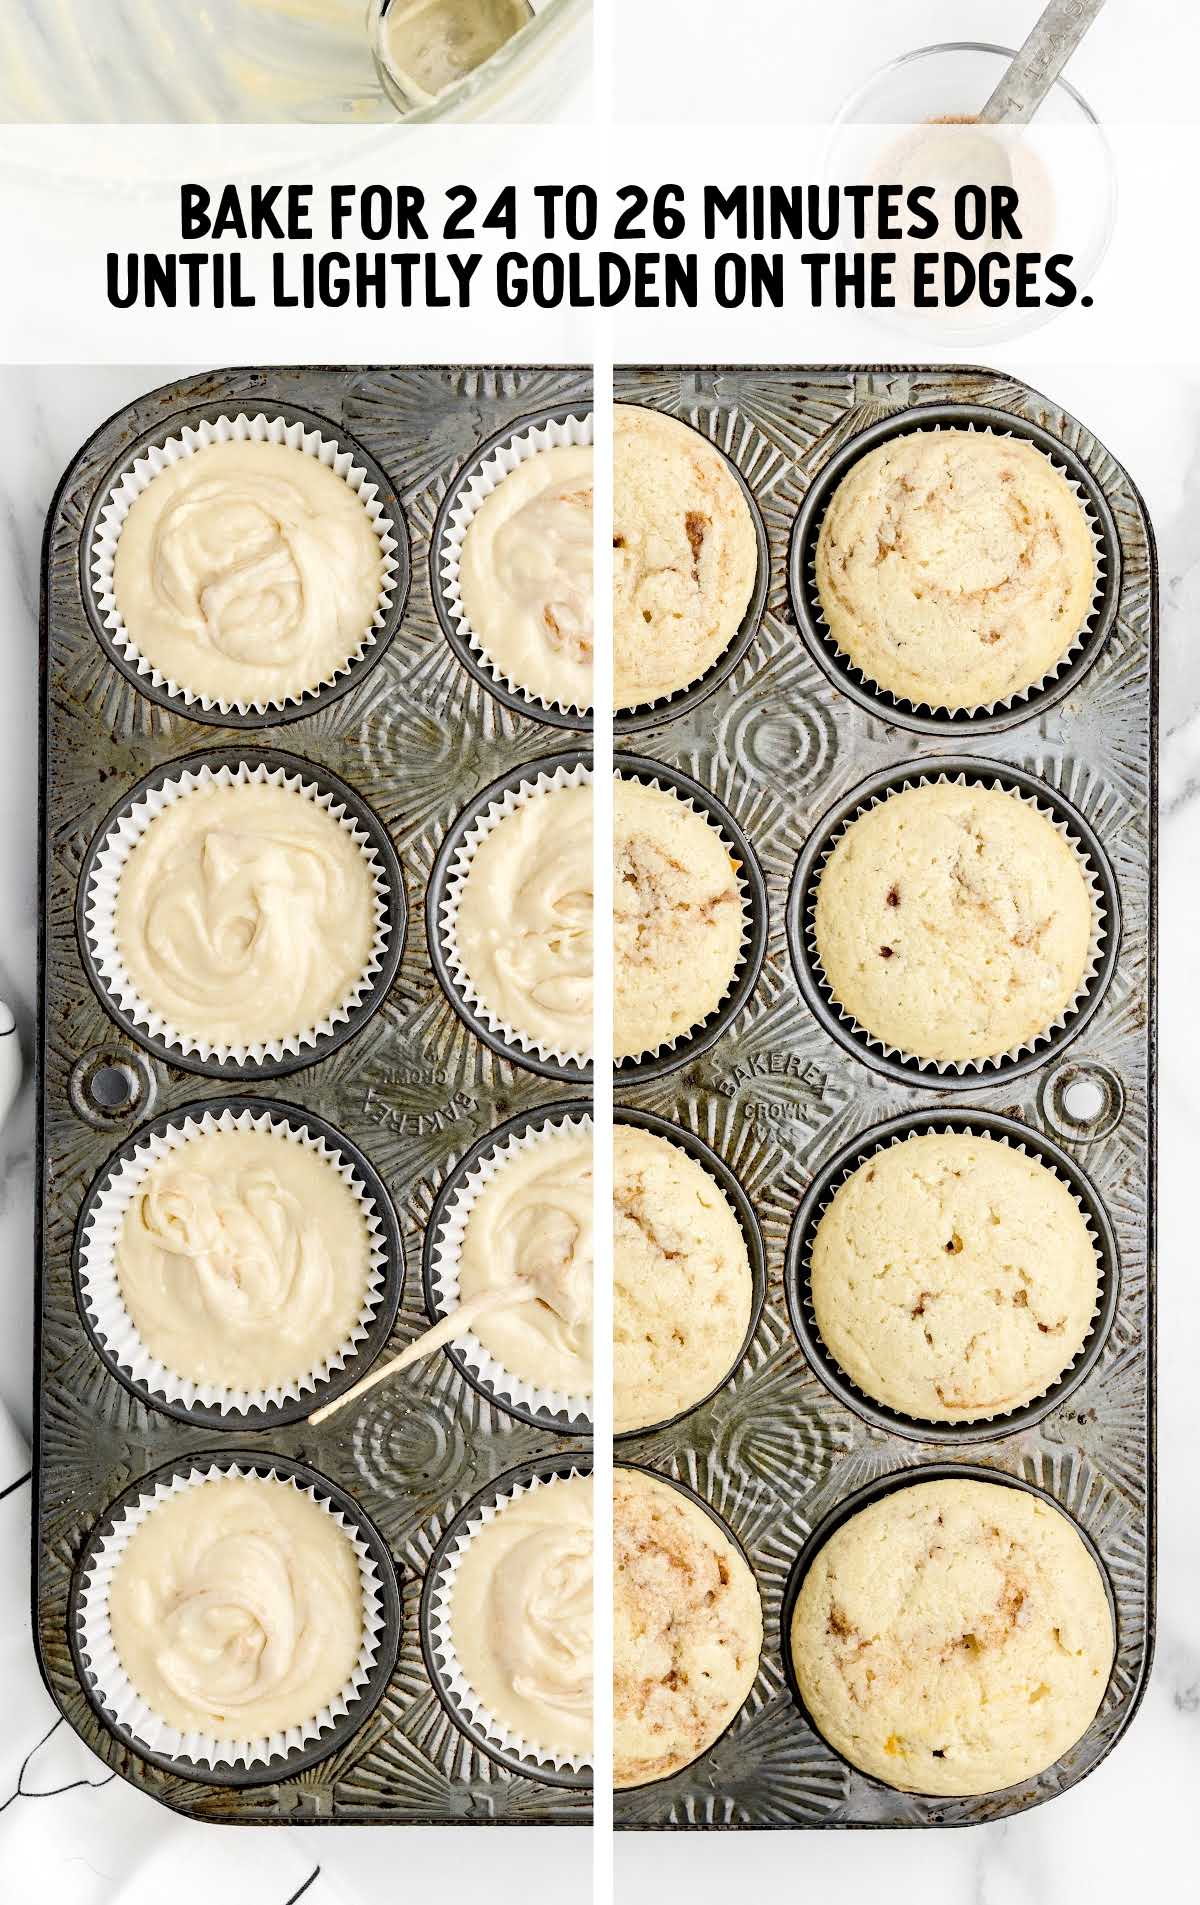 Cinnamon Cupcakes baked for 24 to 26 minutes